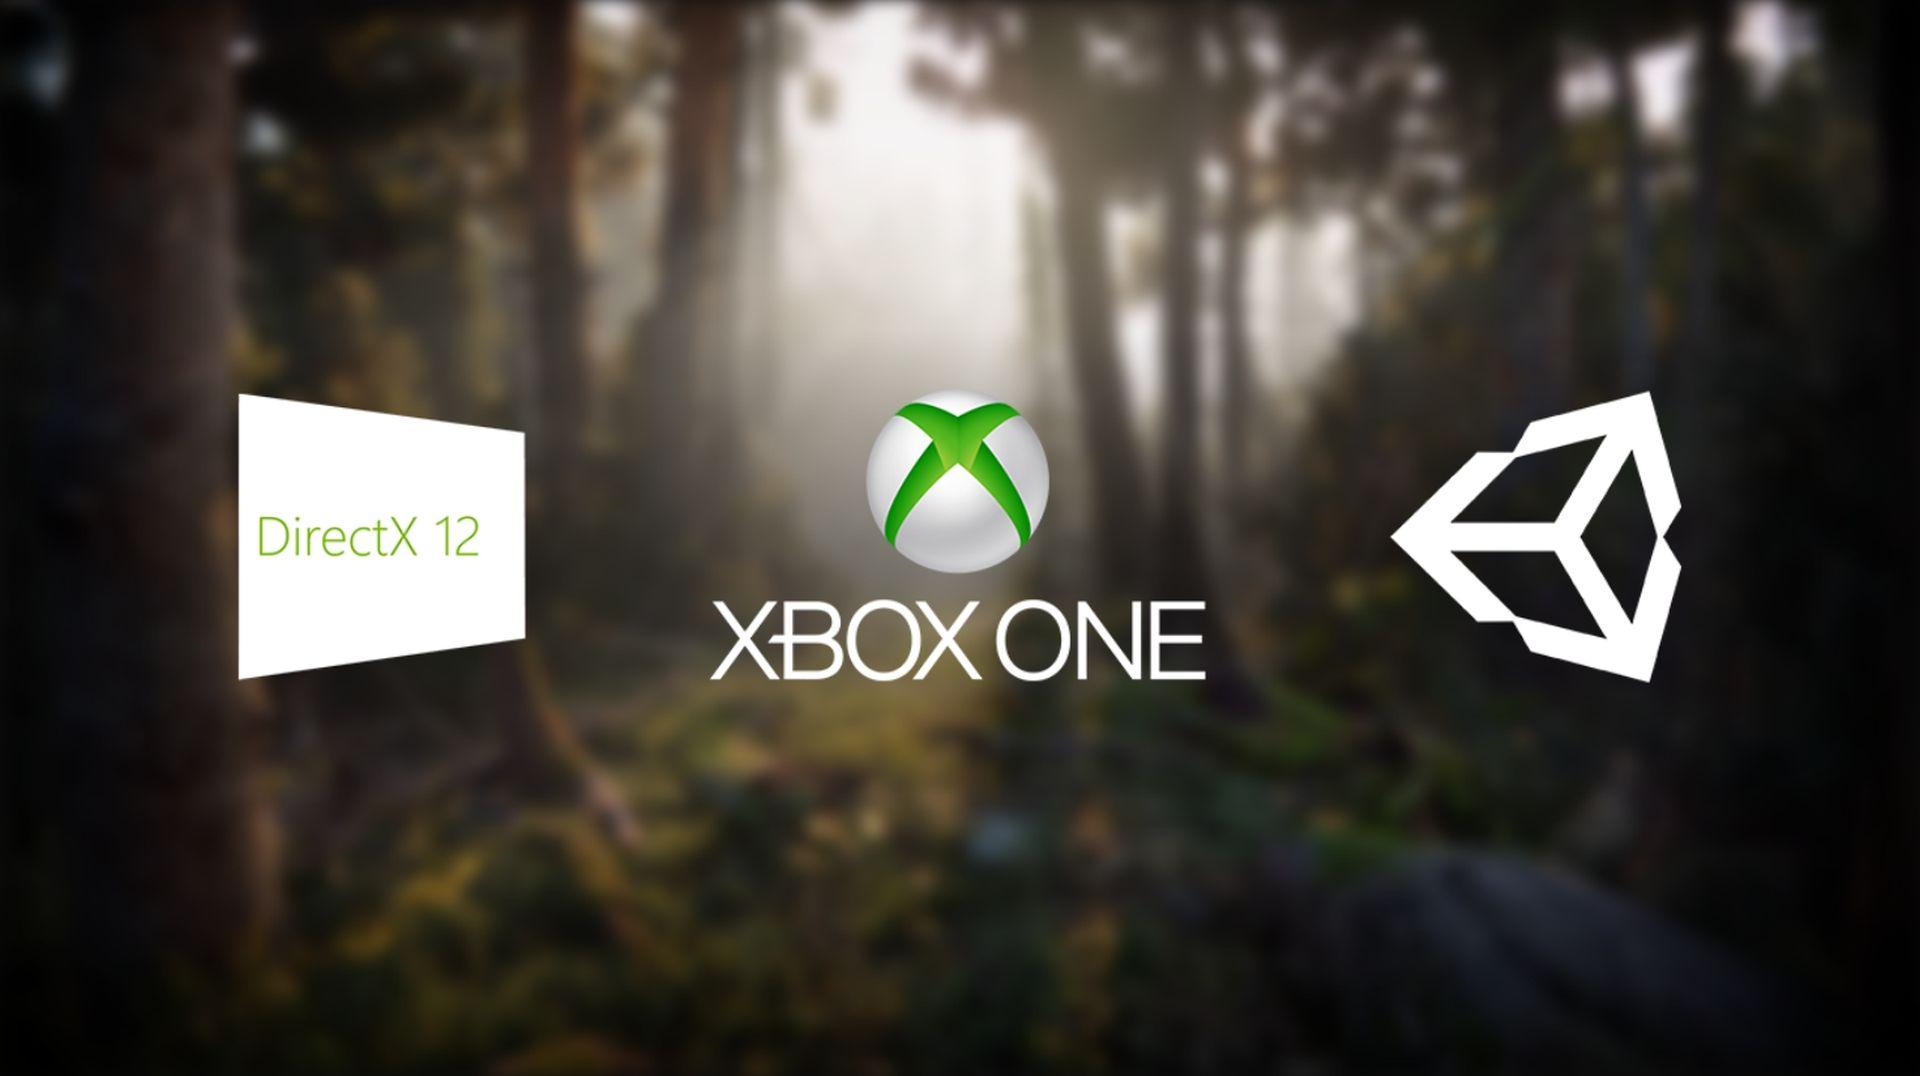 DirectX Logo - Unity Now Supports DirectX 12 on Xbox One, Enabling Performance